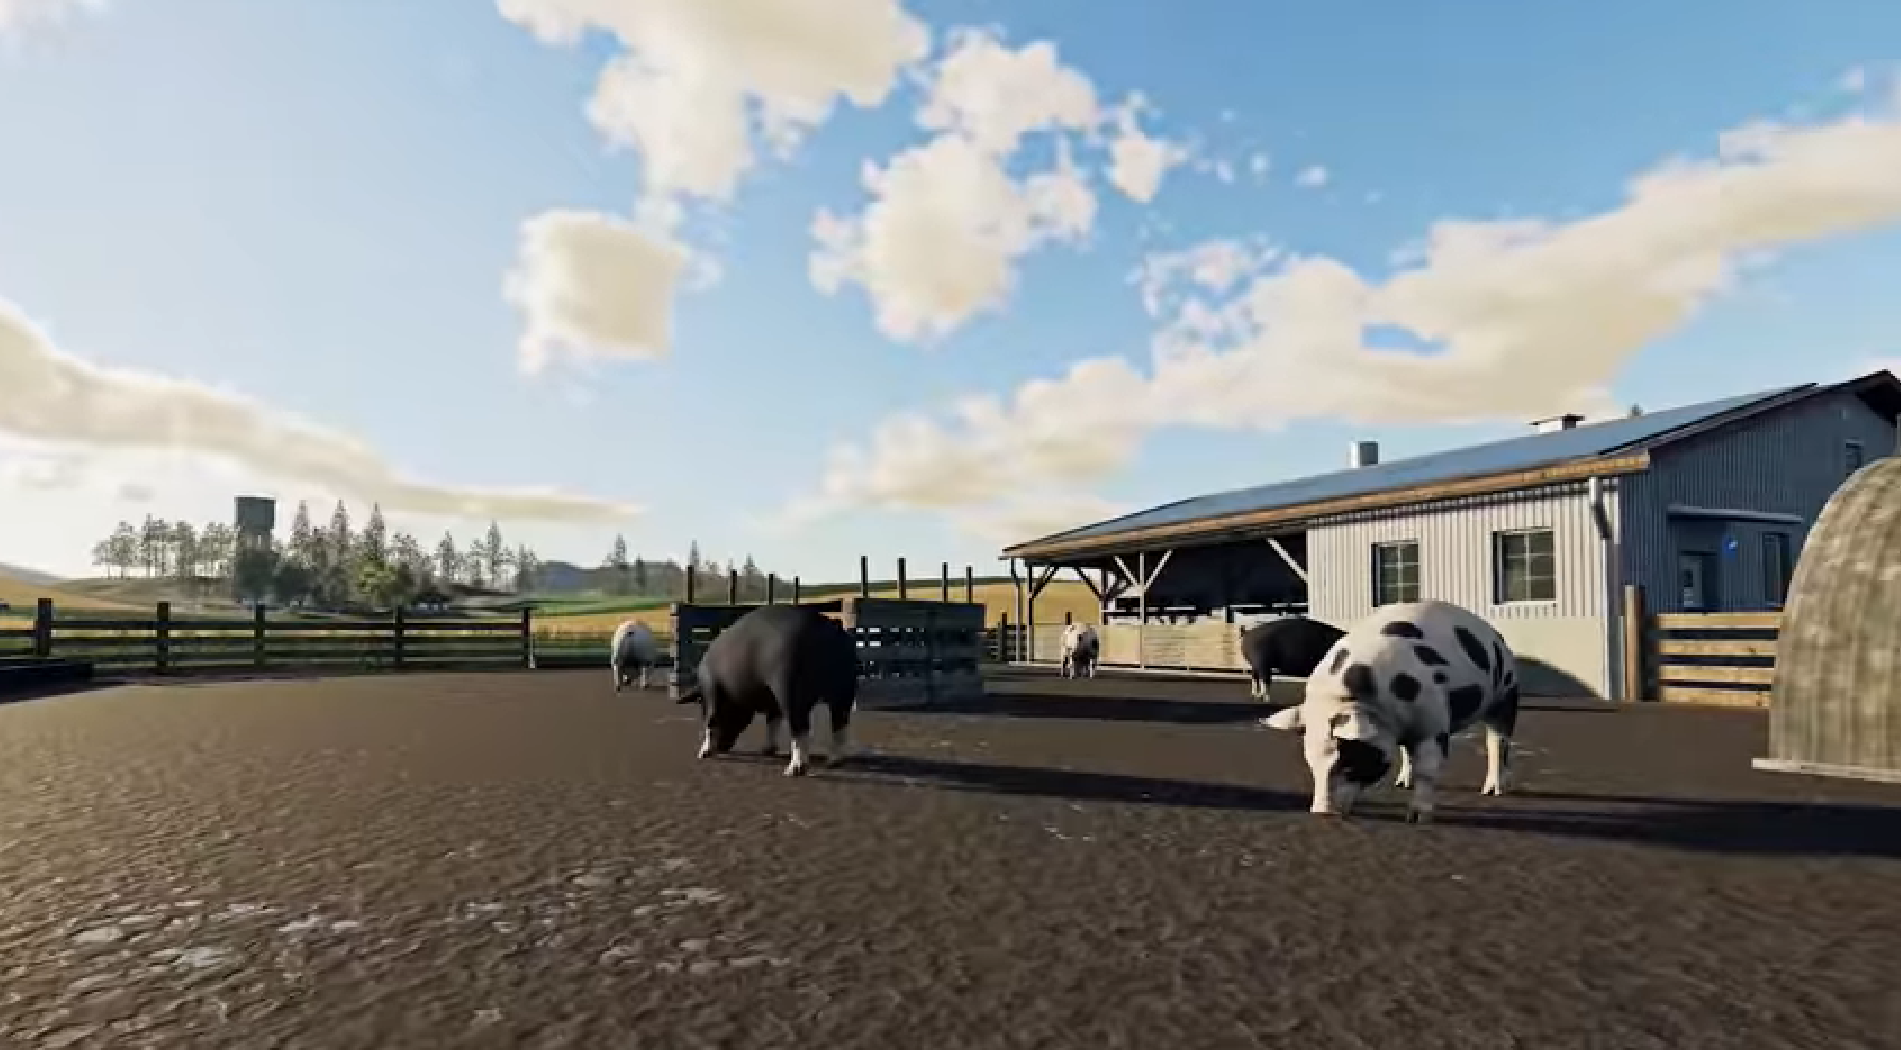 Virtual farm games absorb real money, real lives - CNET